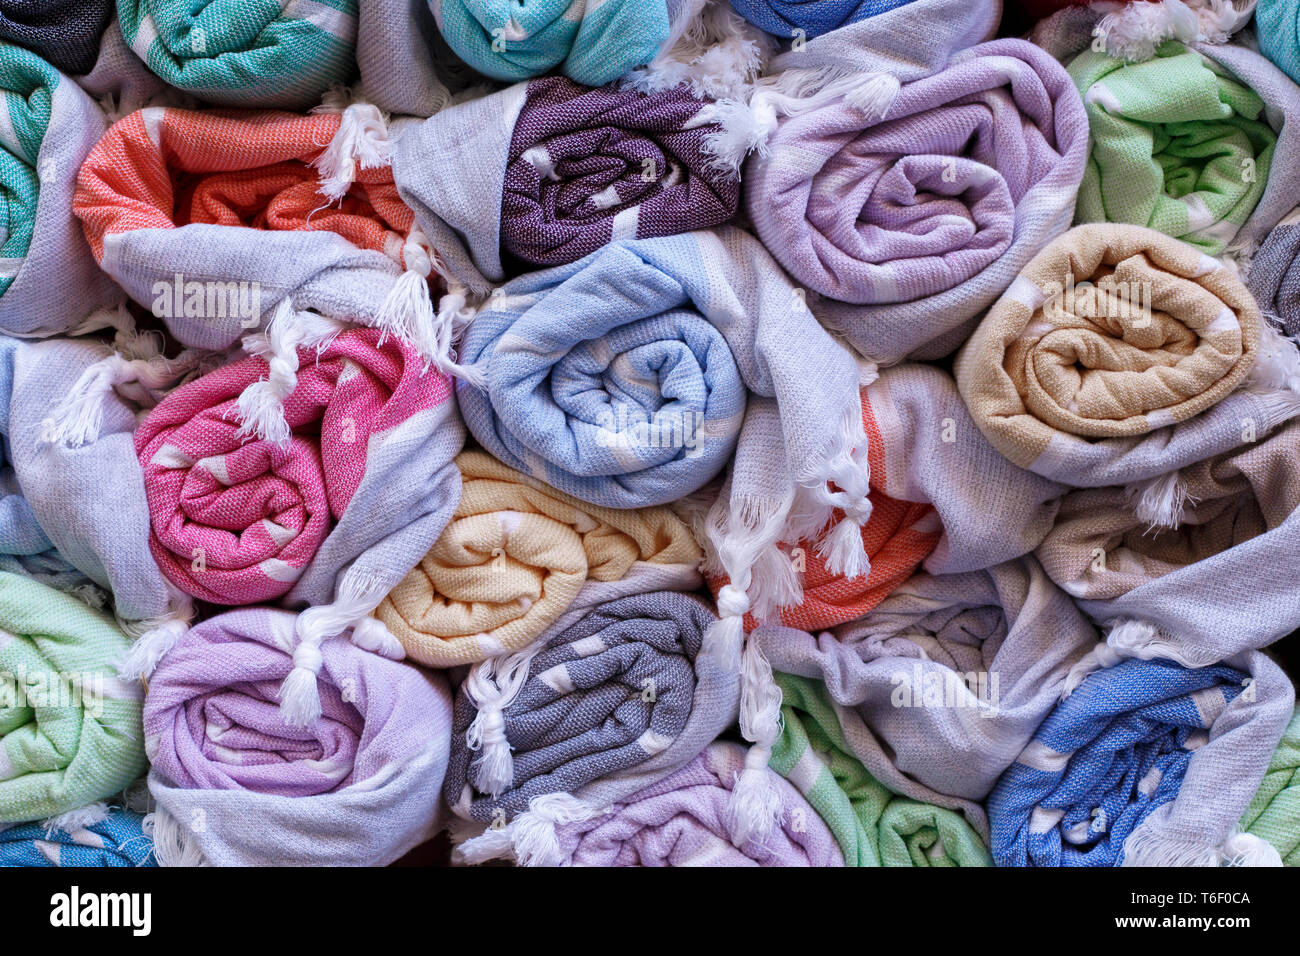 Colorful blankets in a market Stock Photo